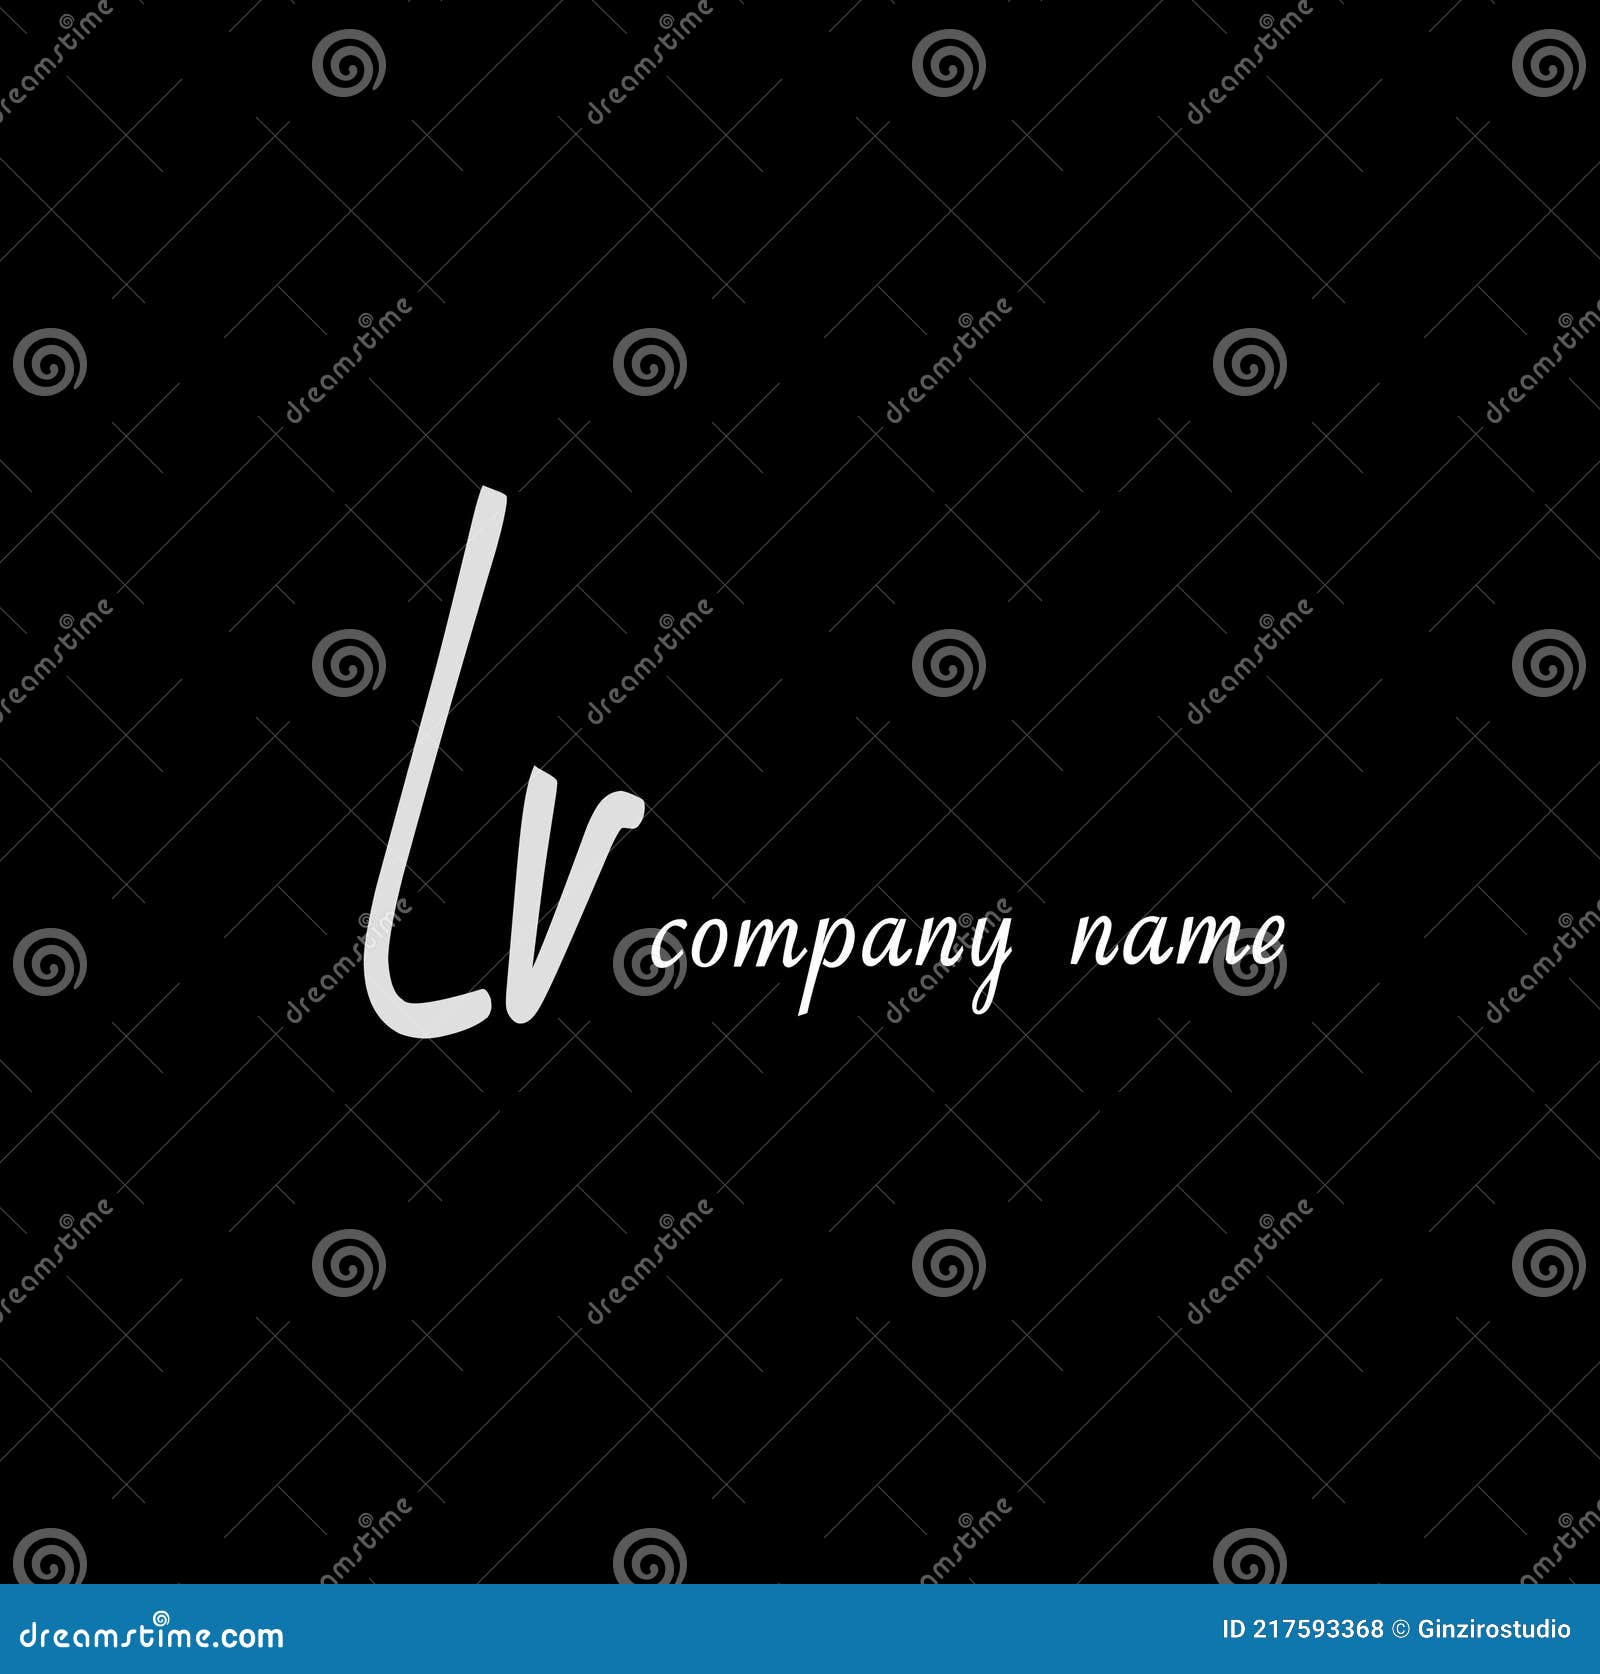 Initial lv letter logo with circle template Vector Image